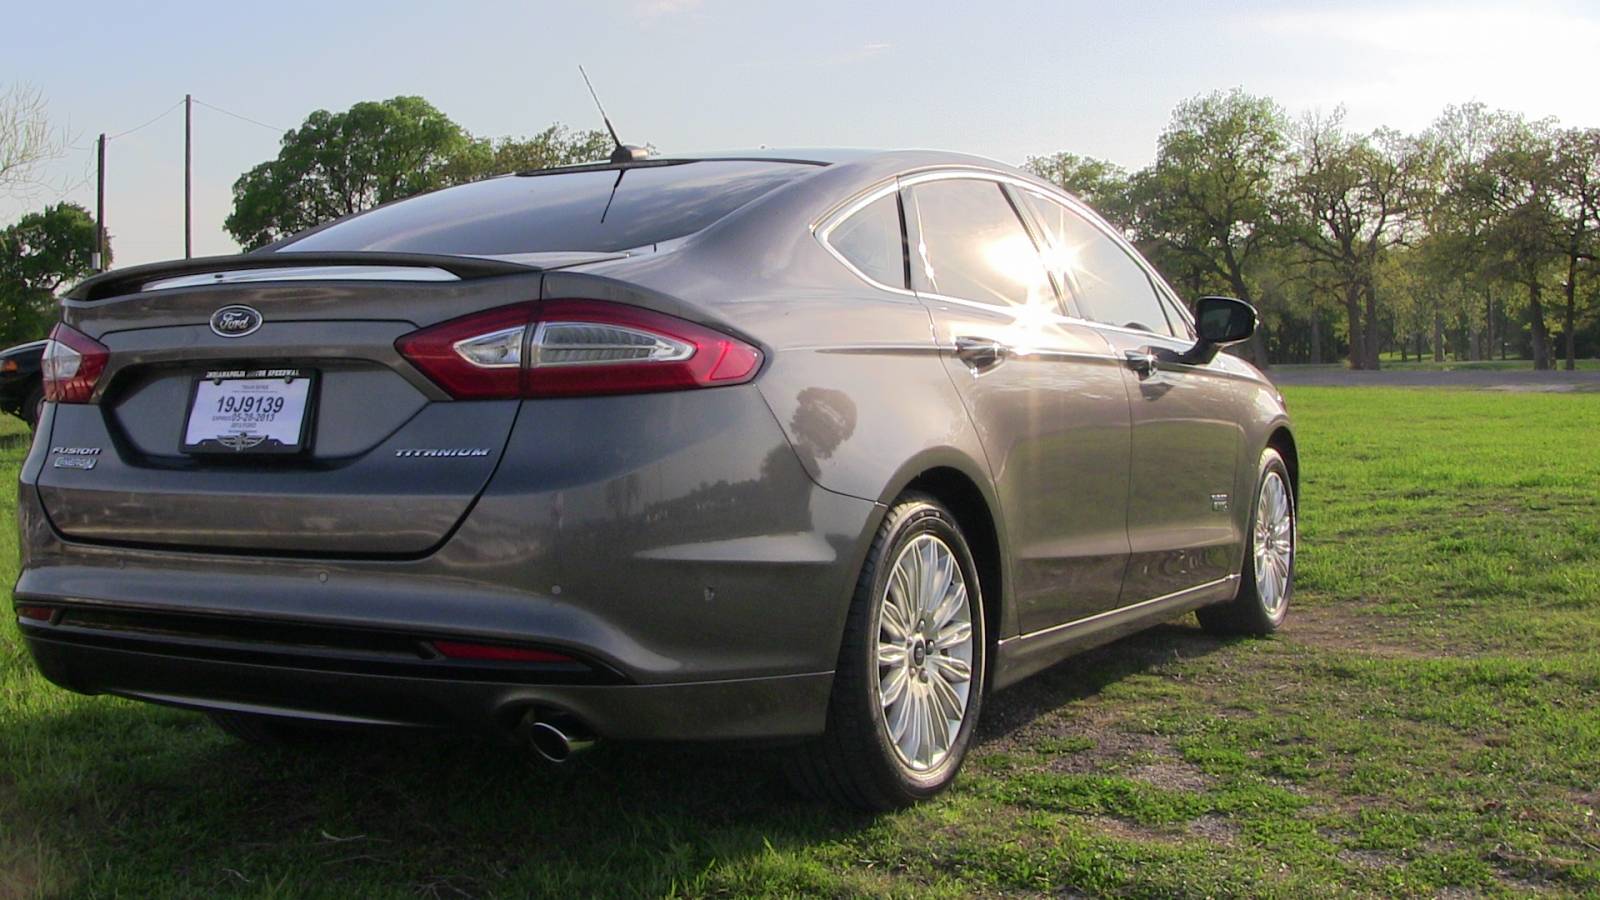 Rear quarter view of the Fusion